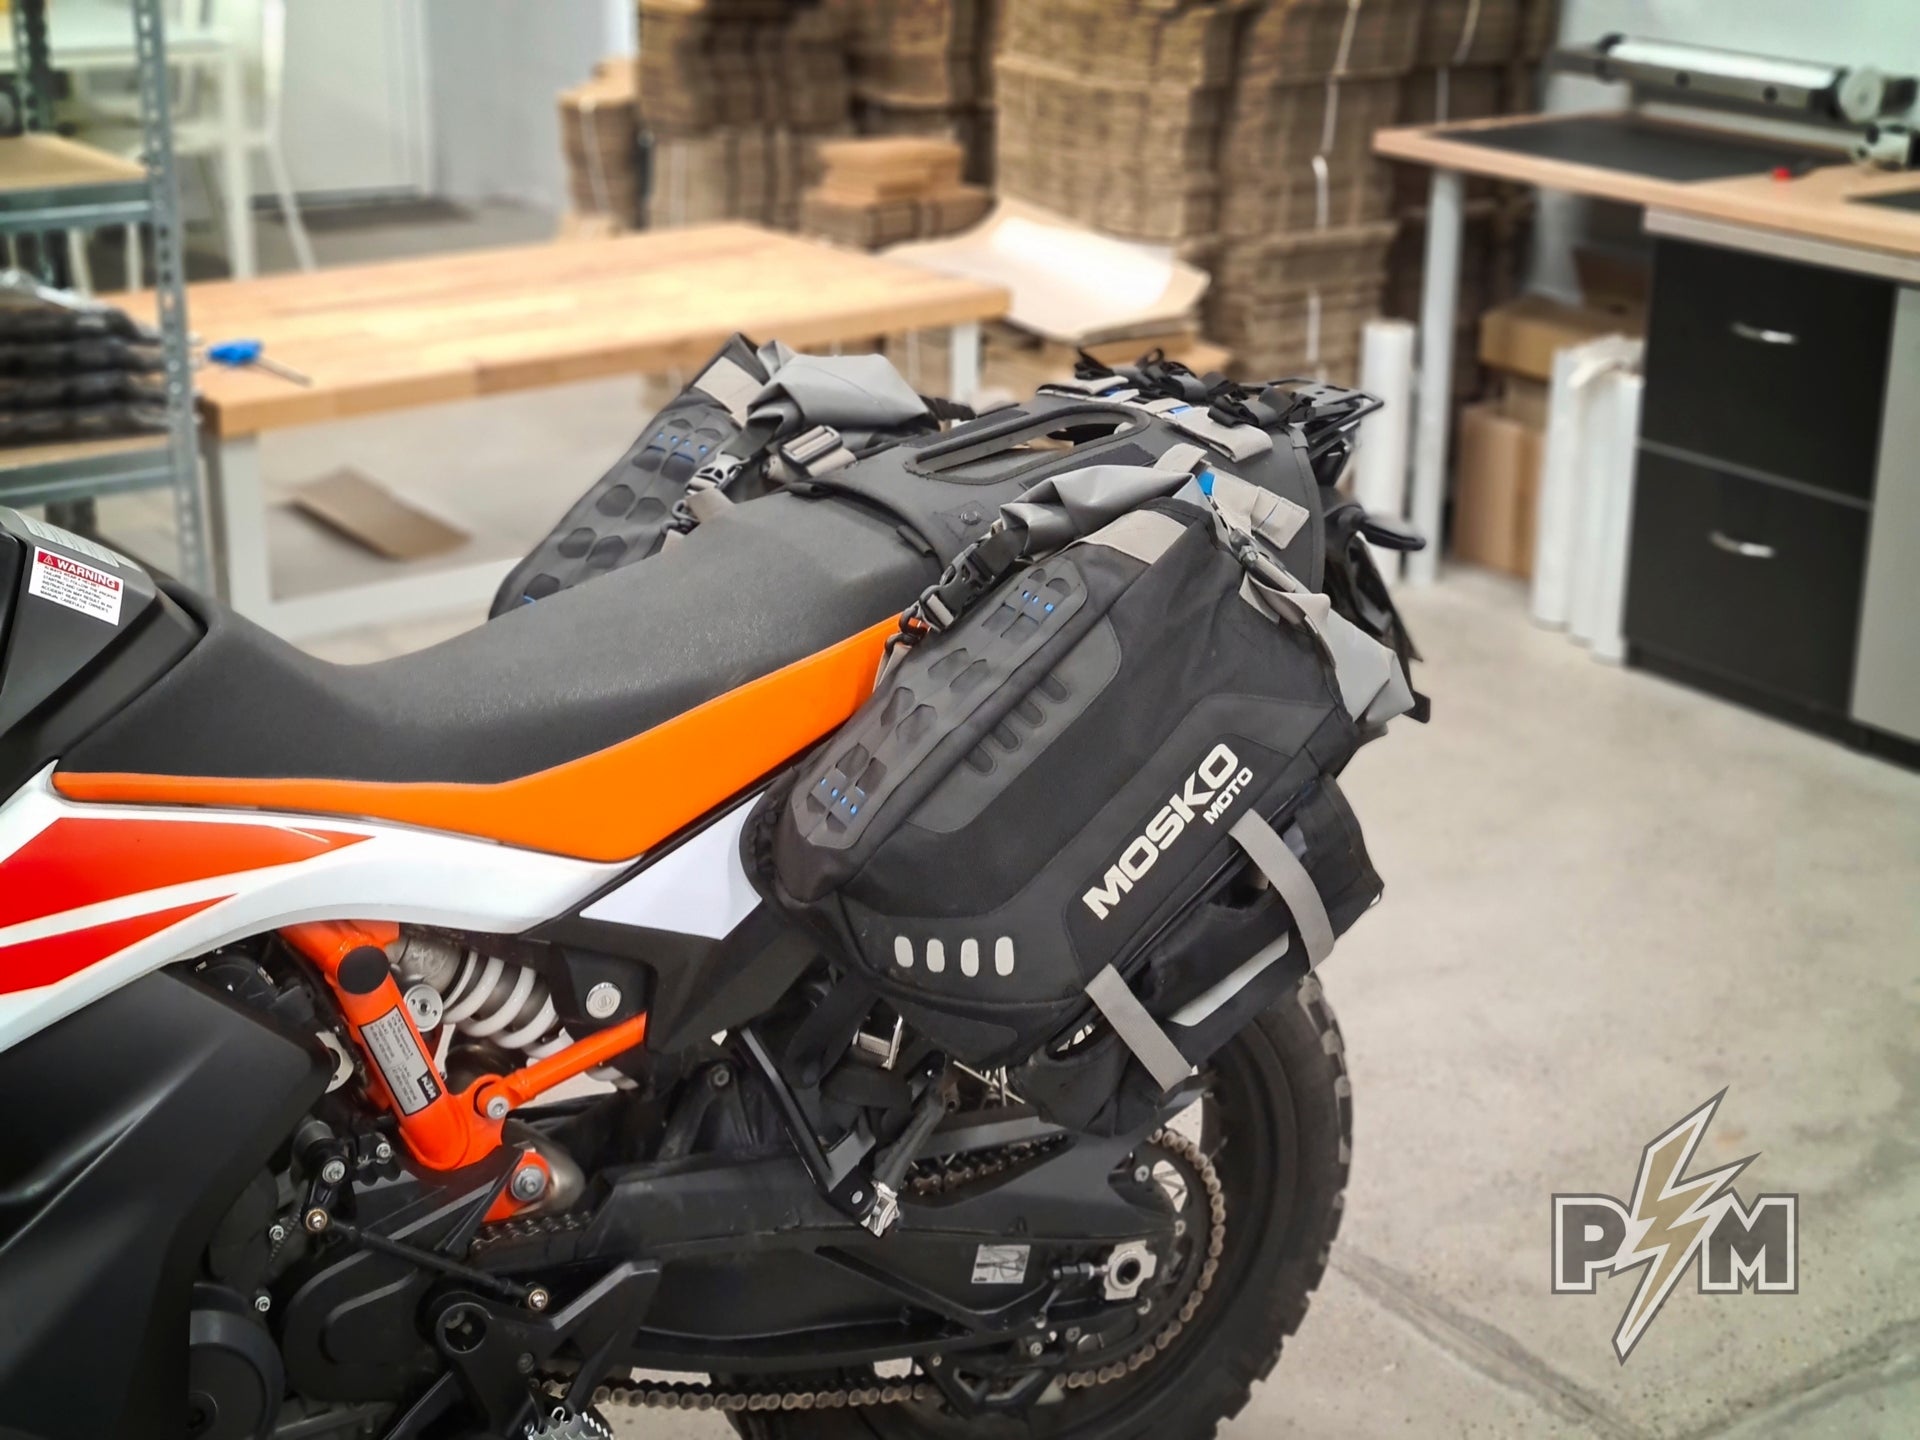 Mosko moto Reckless 40 and 80 on KTM 790/890 Adventure with our Billet rack - Small